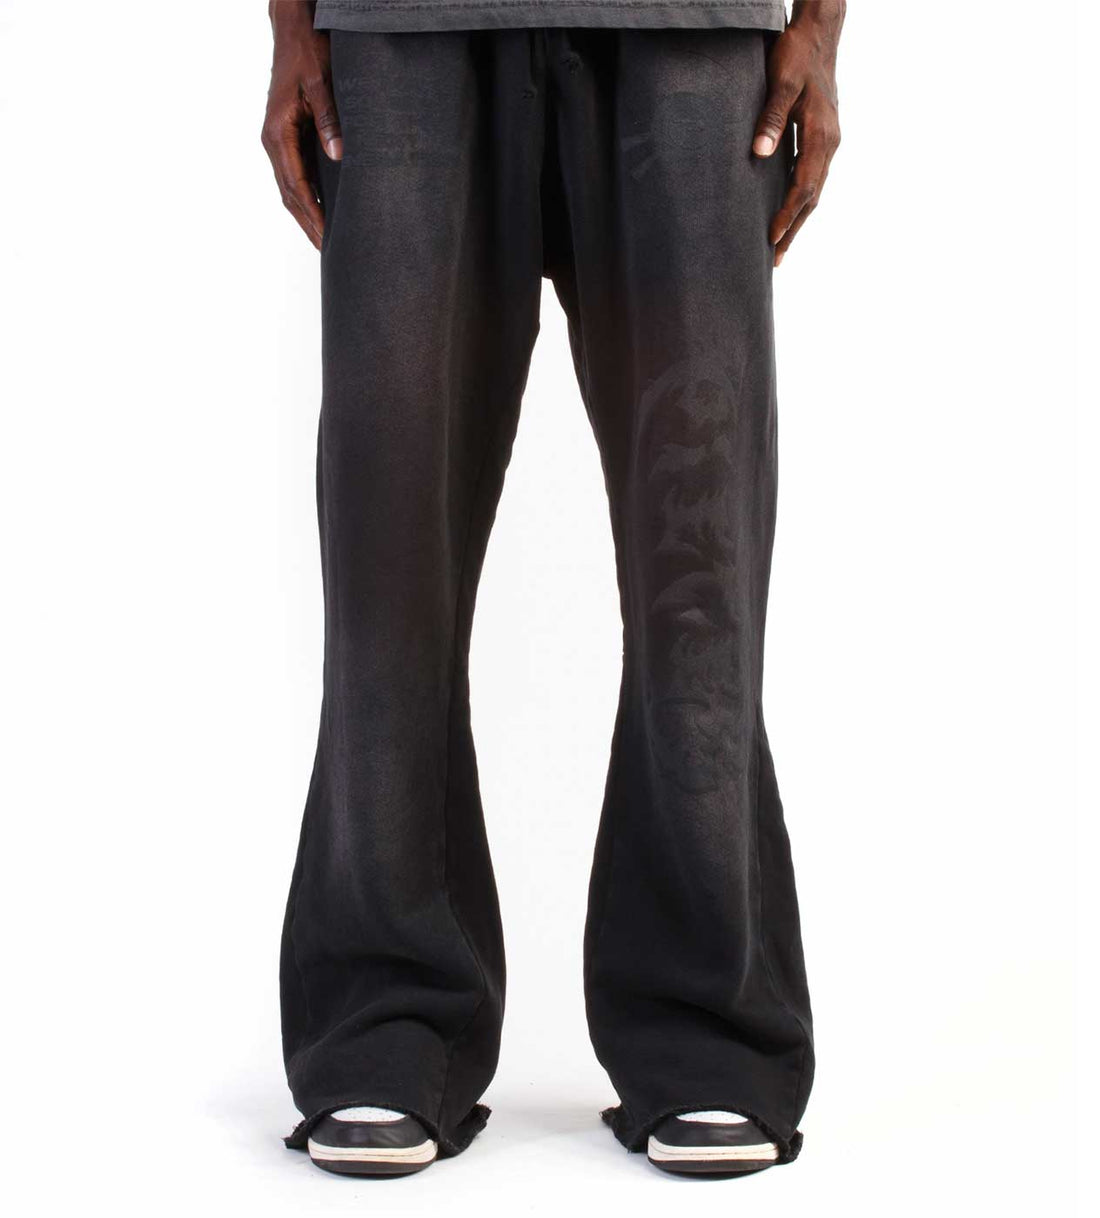 Product Image Of Pieces Studios Flared Sweatpants Vintage Black Model Wearing